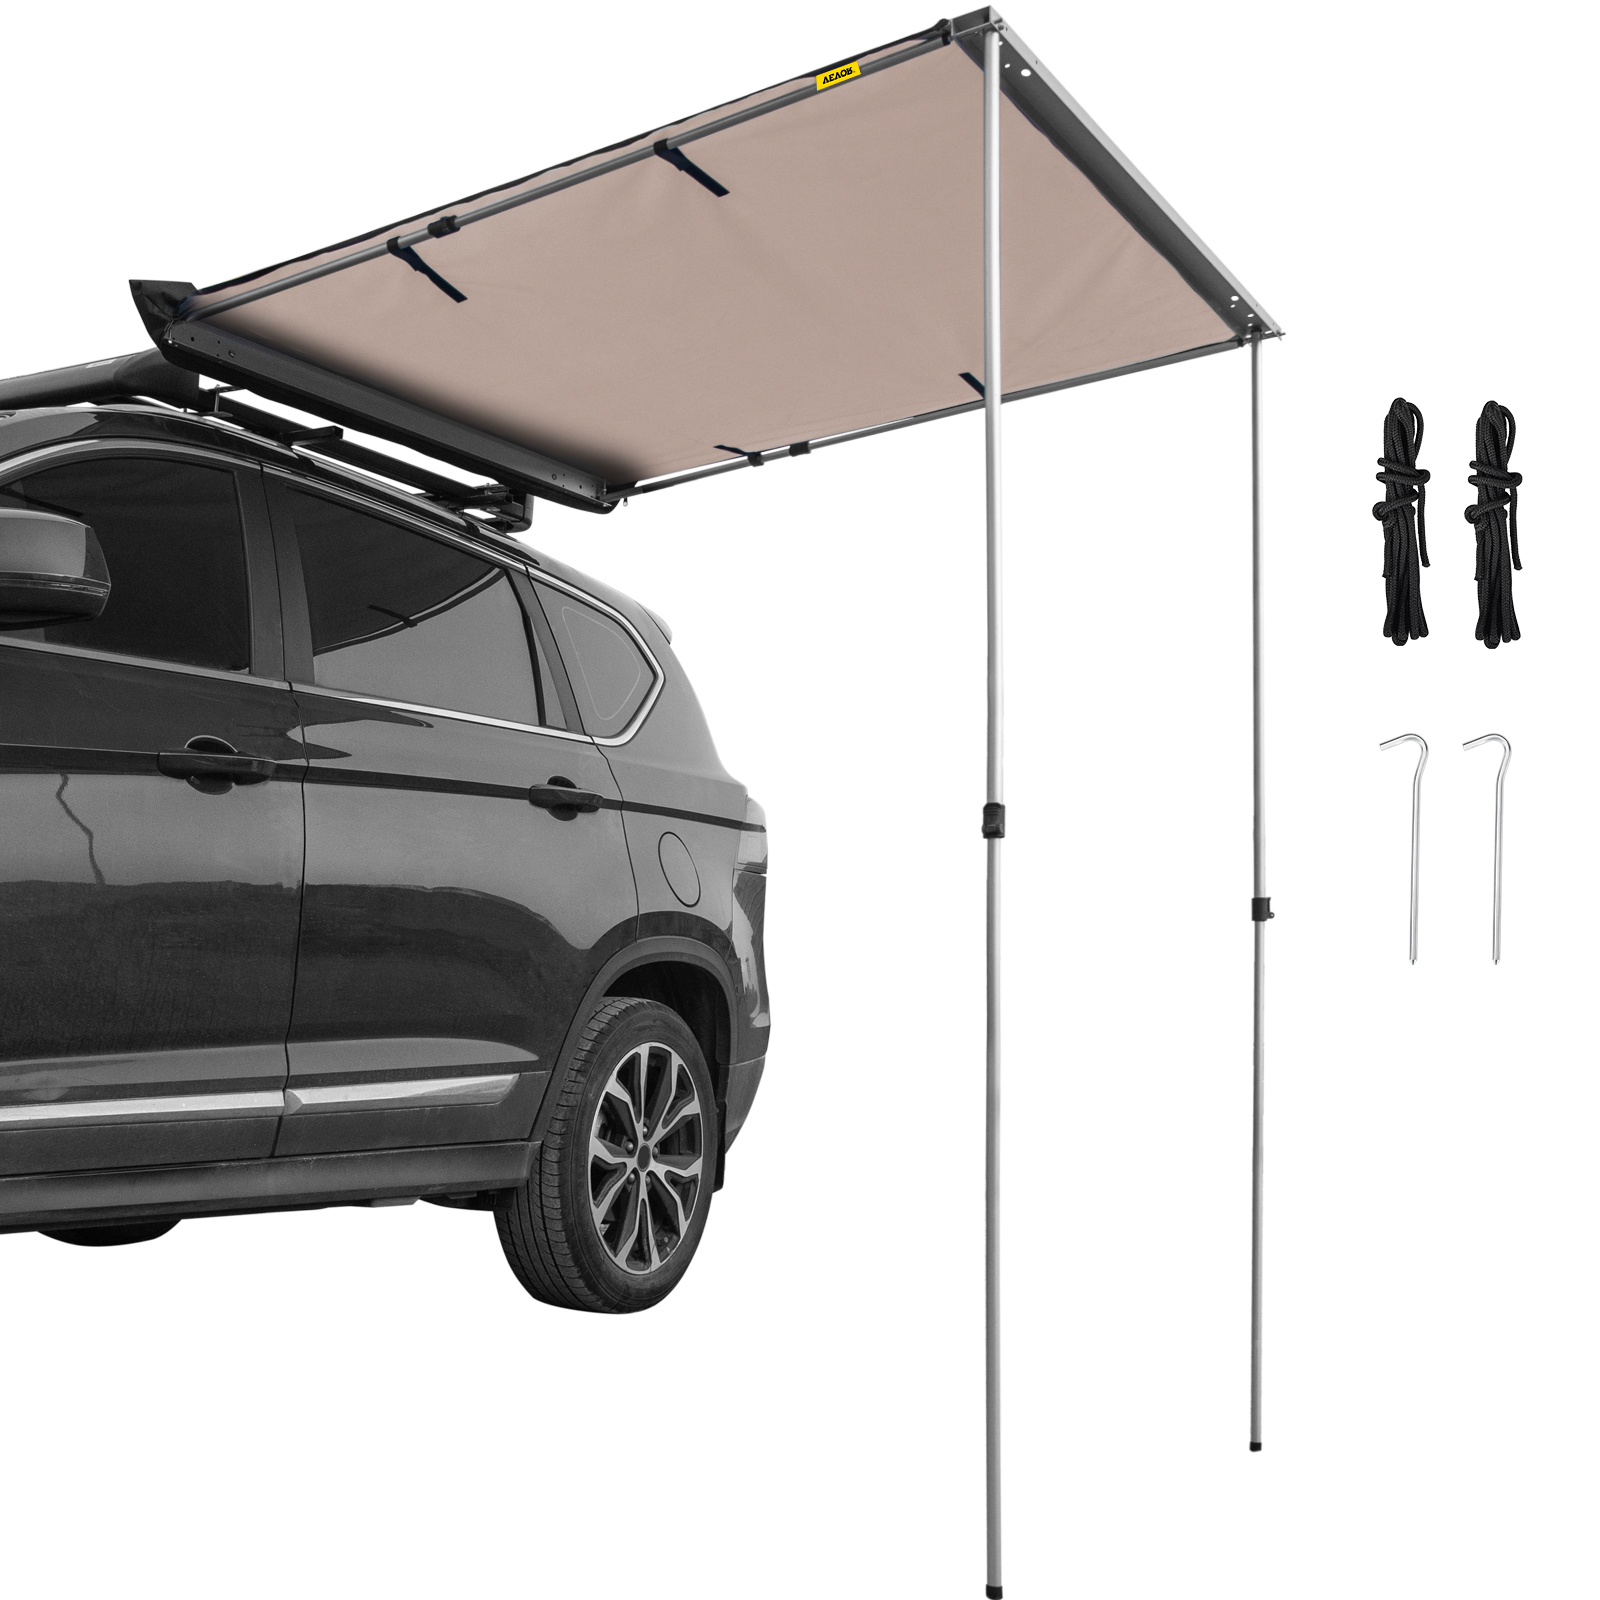 VEVOR Car Side Awning, 8.2'x6.5', Pull-Out Retractable Vehicle Awning  Waterproof UV50+, Telescoping Poles Trailer Sunshade Rooftop Tent w/Carry  Bag for Jeep/SUV/Truck/Van Outdoor Camping Travel, Khaki VEVOR US